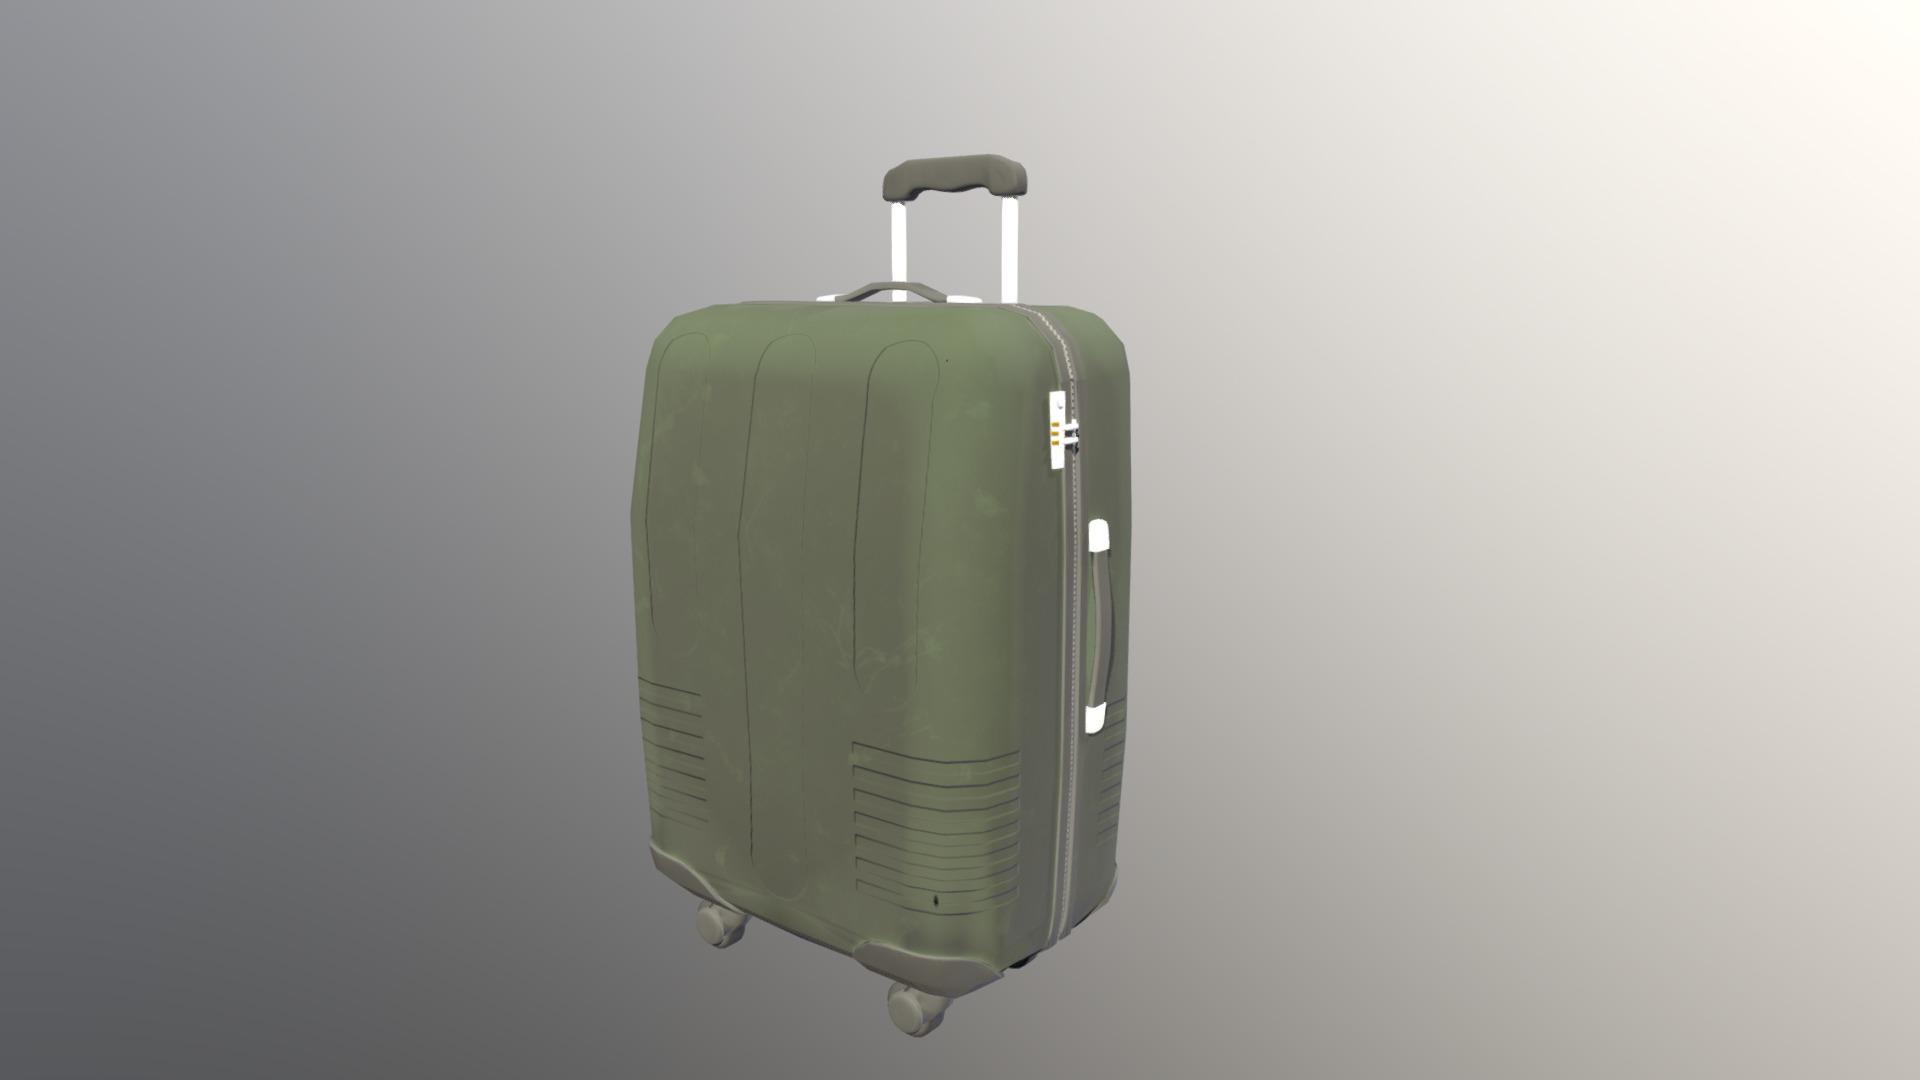 3D model Case - This is a 3D model of the Case. The 3D model is about a suitcase on a white background.